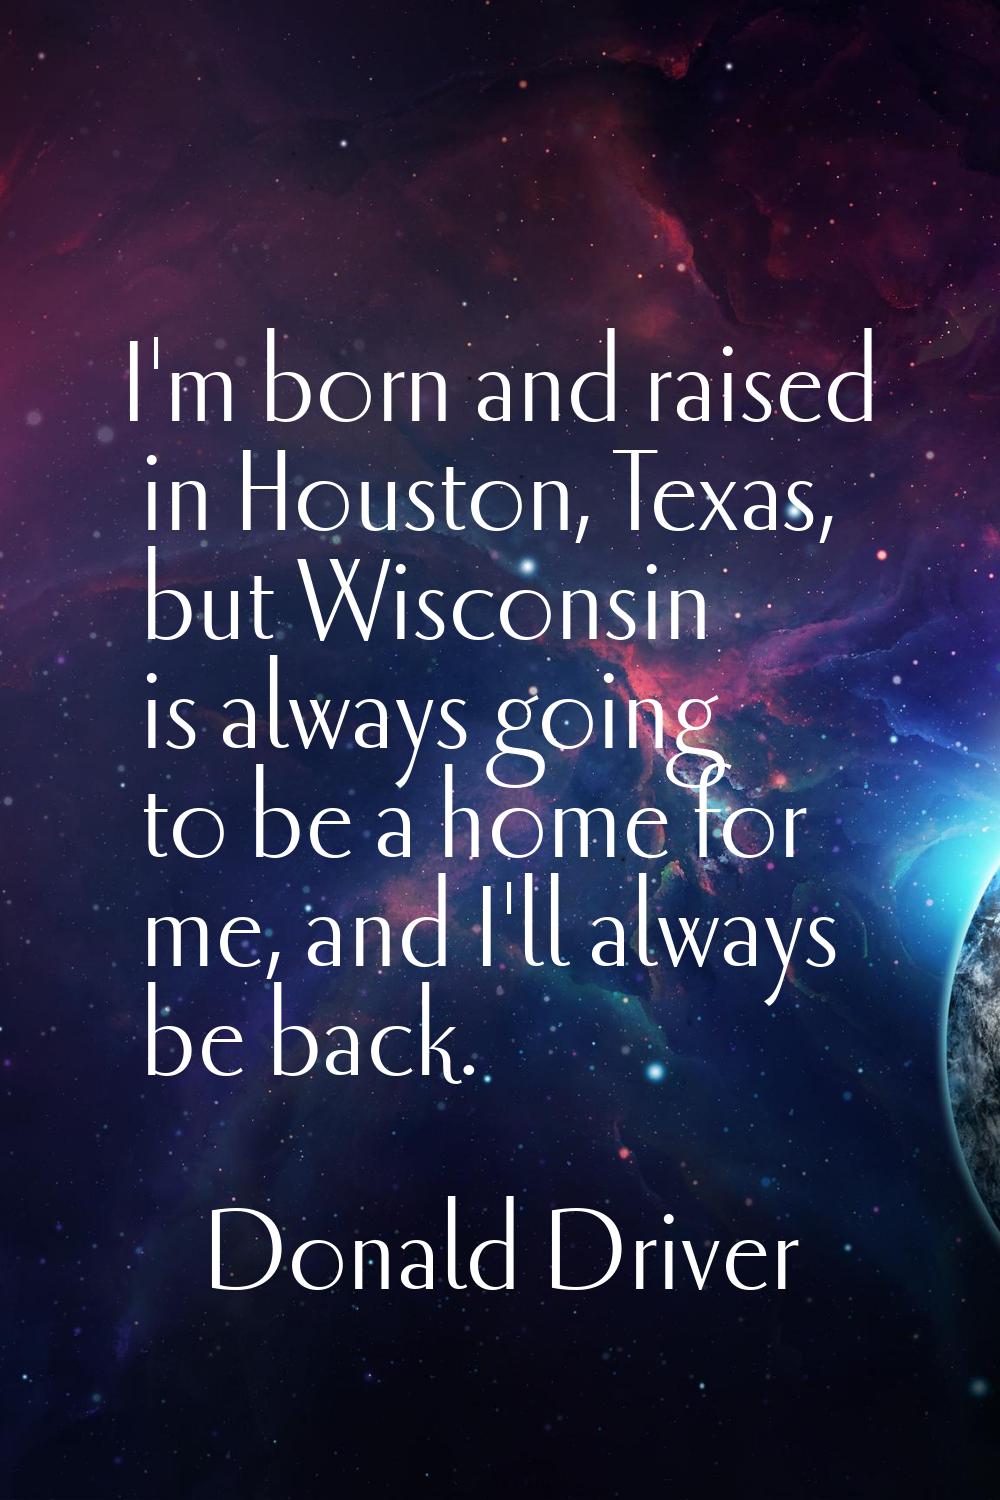 I'm born and raised in Houston, Texas, but Wisconsin is always going to be a home for me, and I'll 